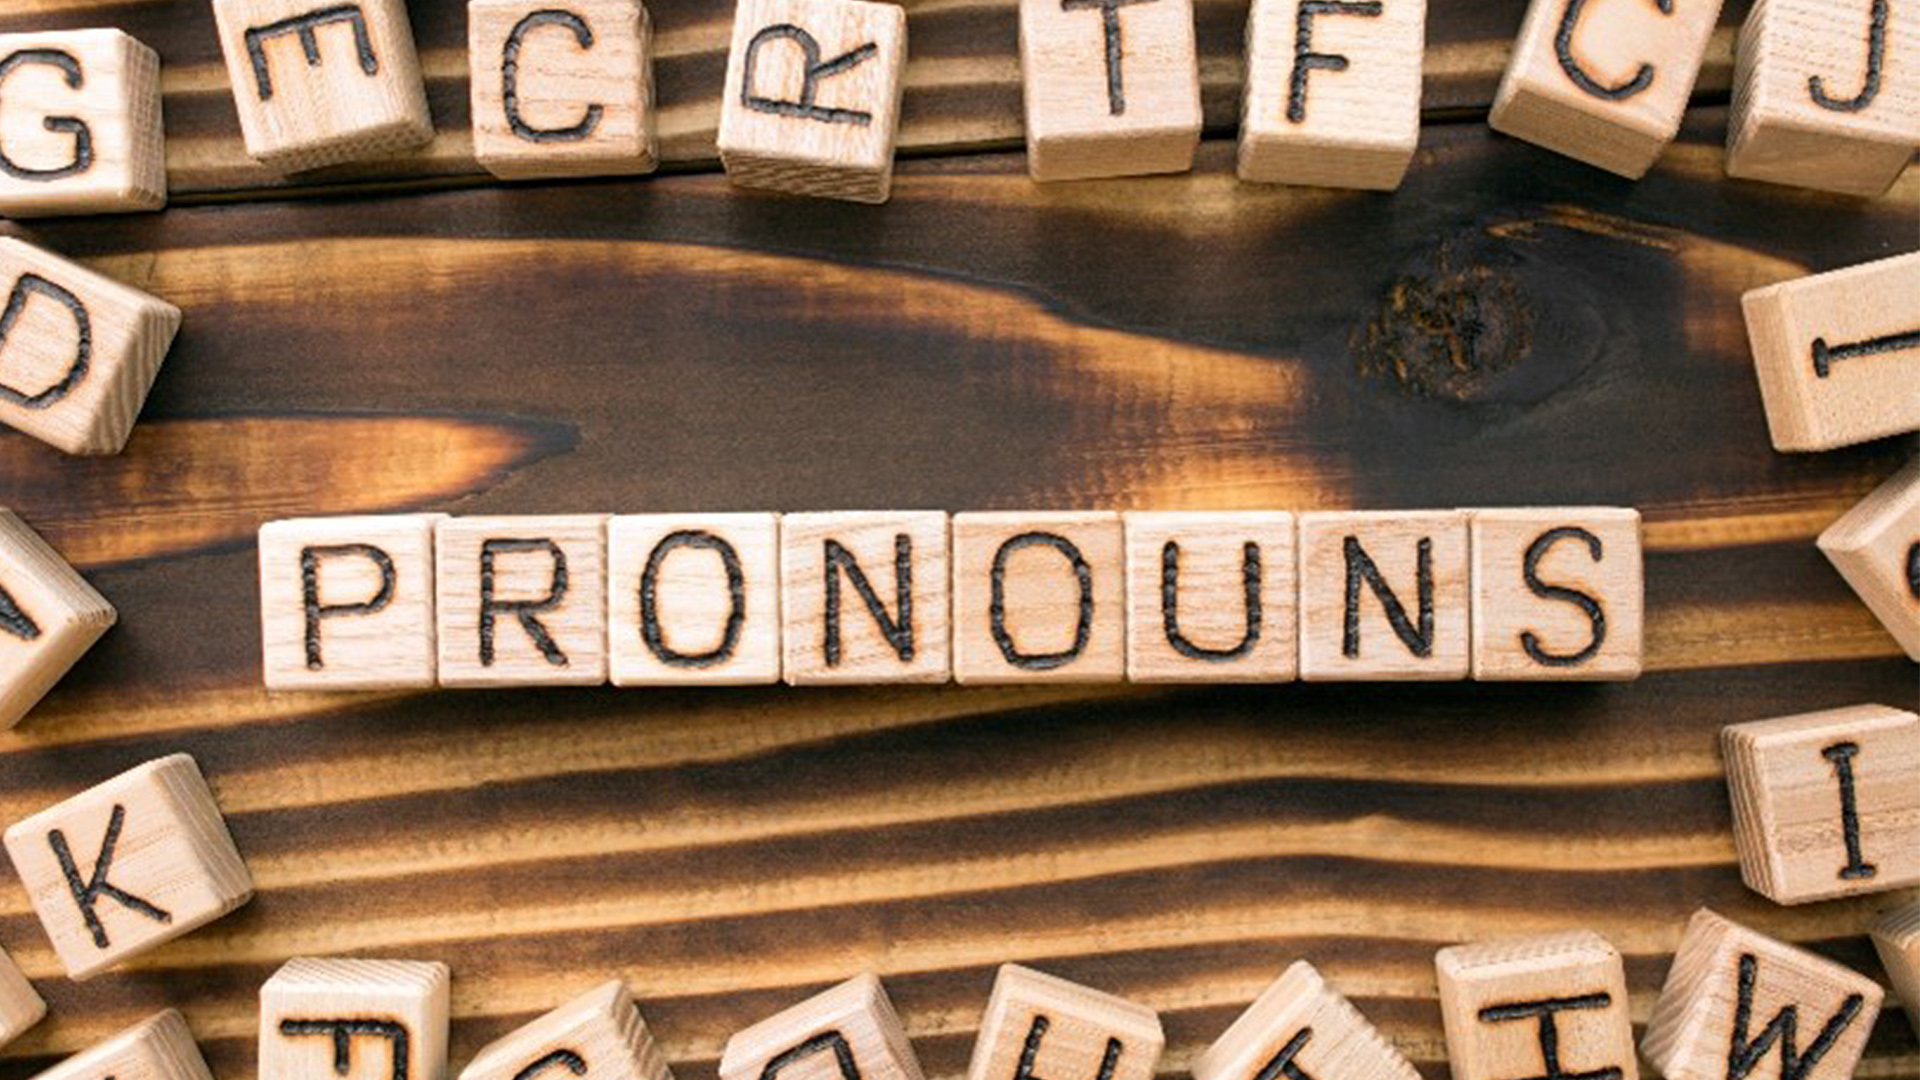 Personal pronouns: Why do they matter?